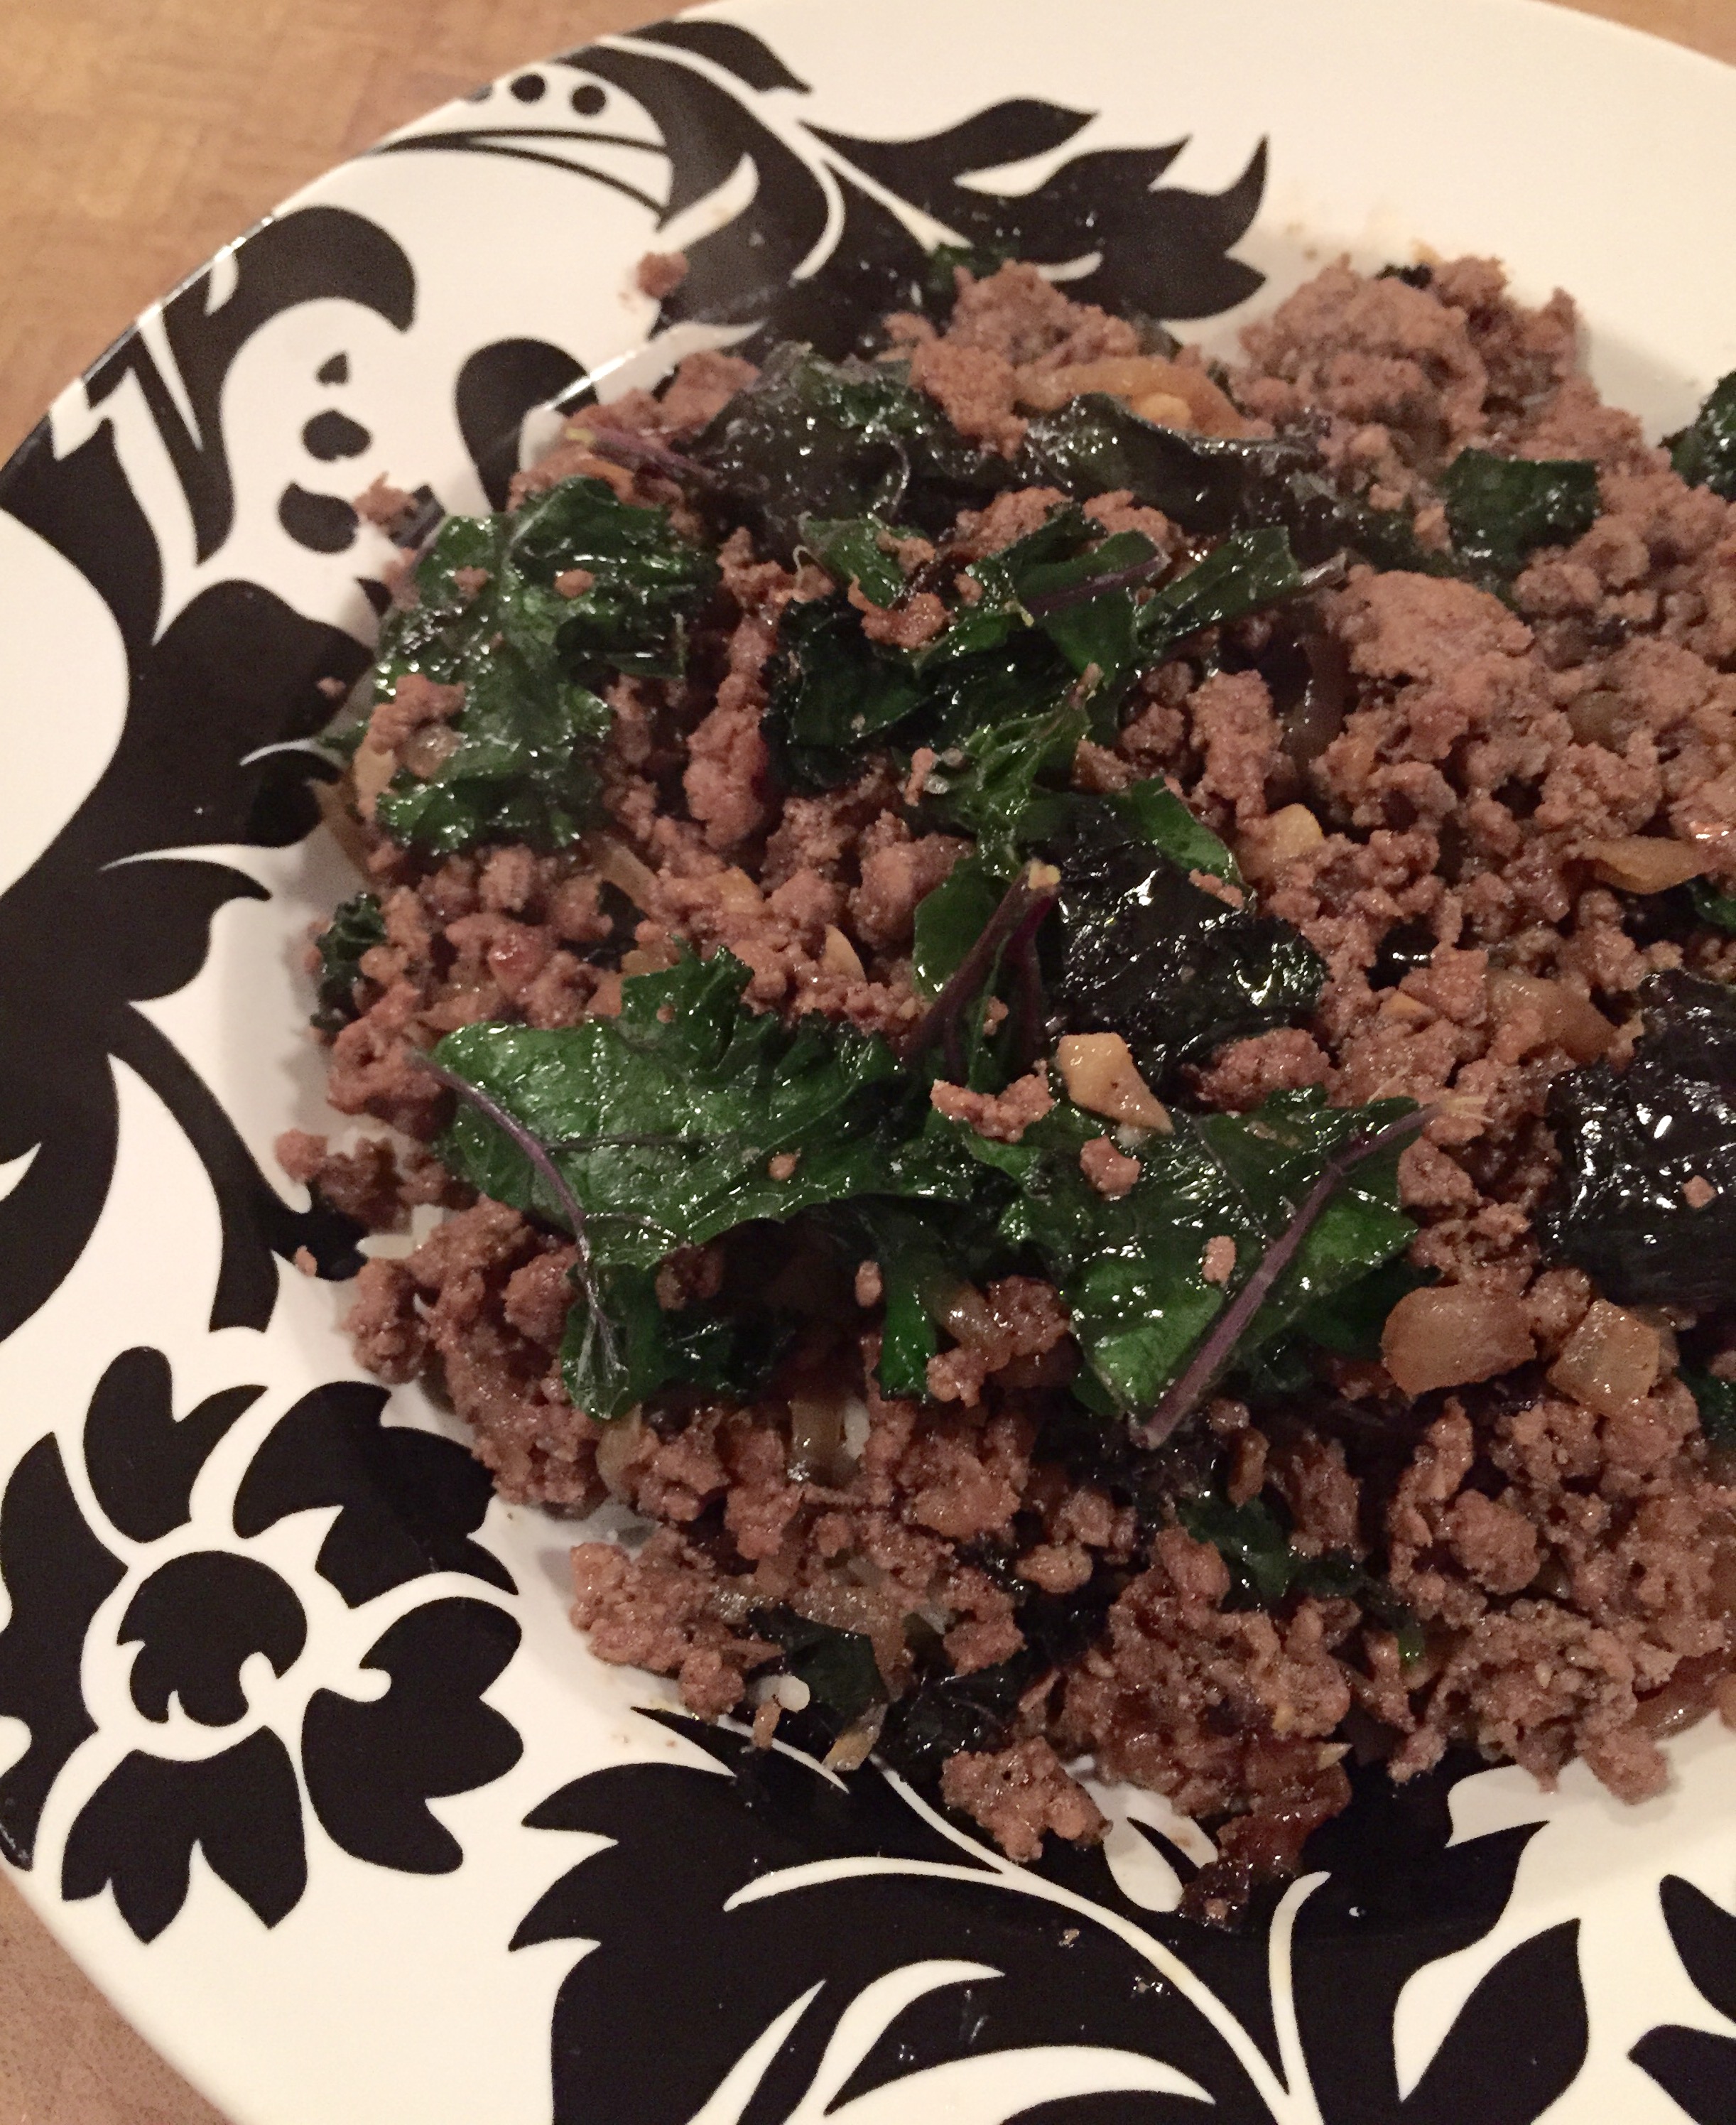 30 Minute Meal- Ground Beef and Kale Bowl - Simply Paleo